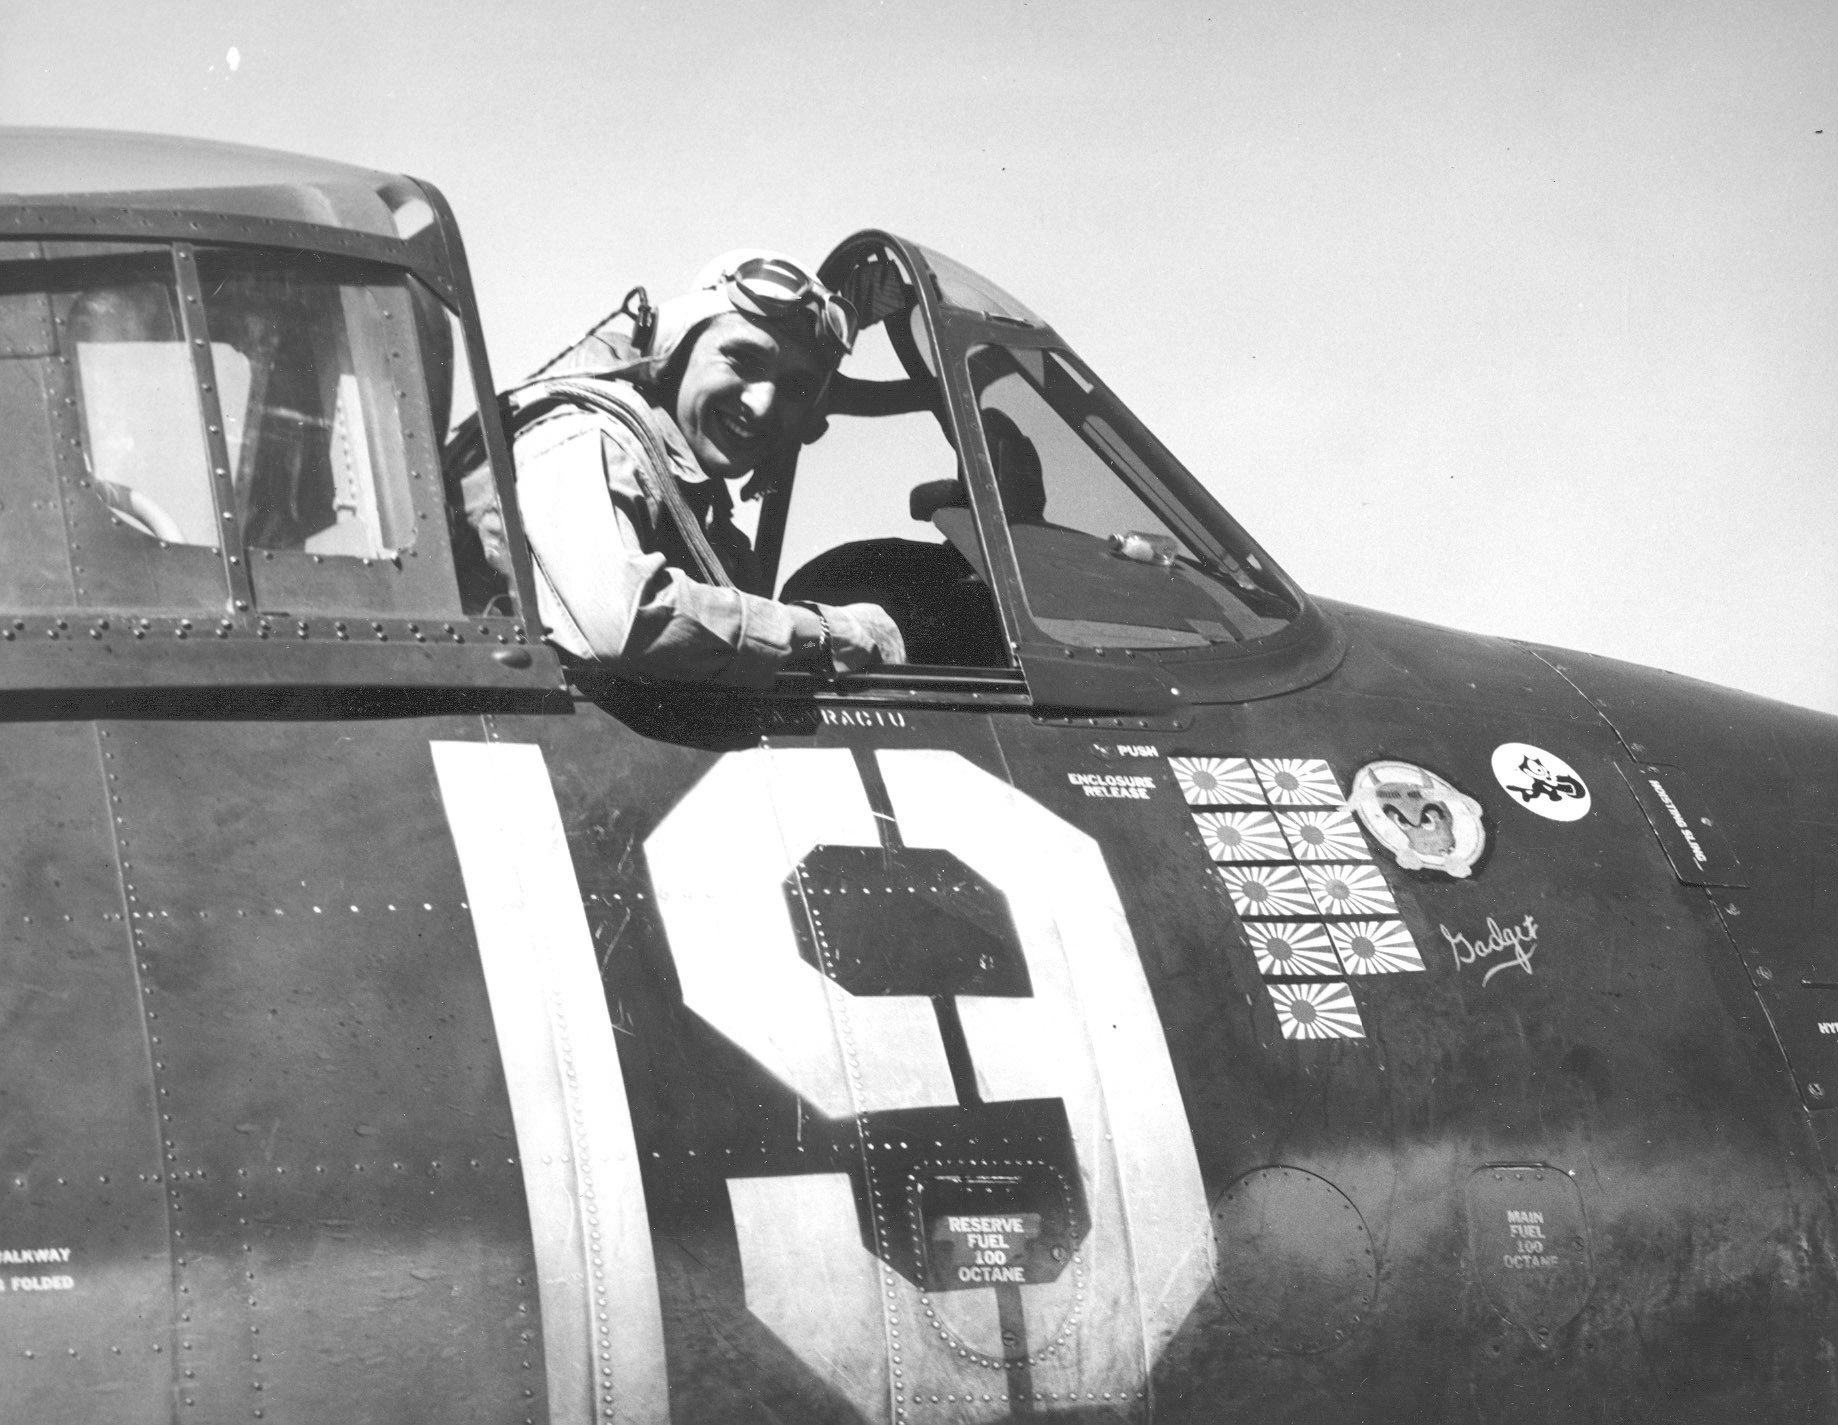 US Lt (jg) Alexander Vraciu of Fighting Squadron 6 in his F6F Hellcat 'Gadget' aboard USS Intrepid, 1944, photo 1 of 2; note markings for his first 9 kills